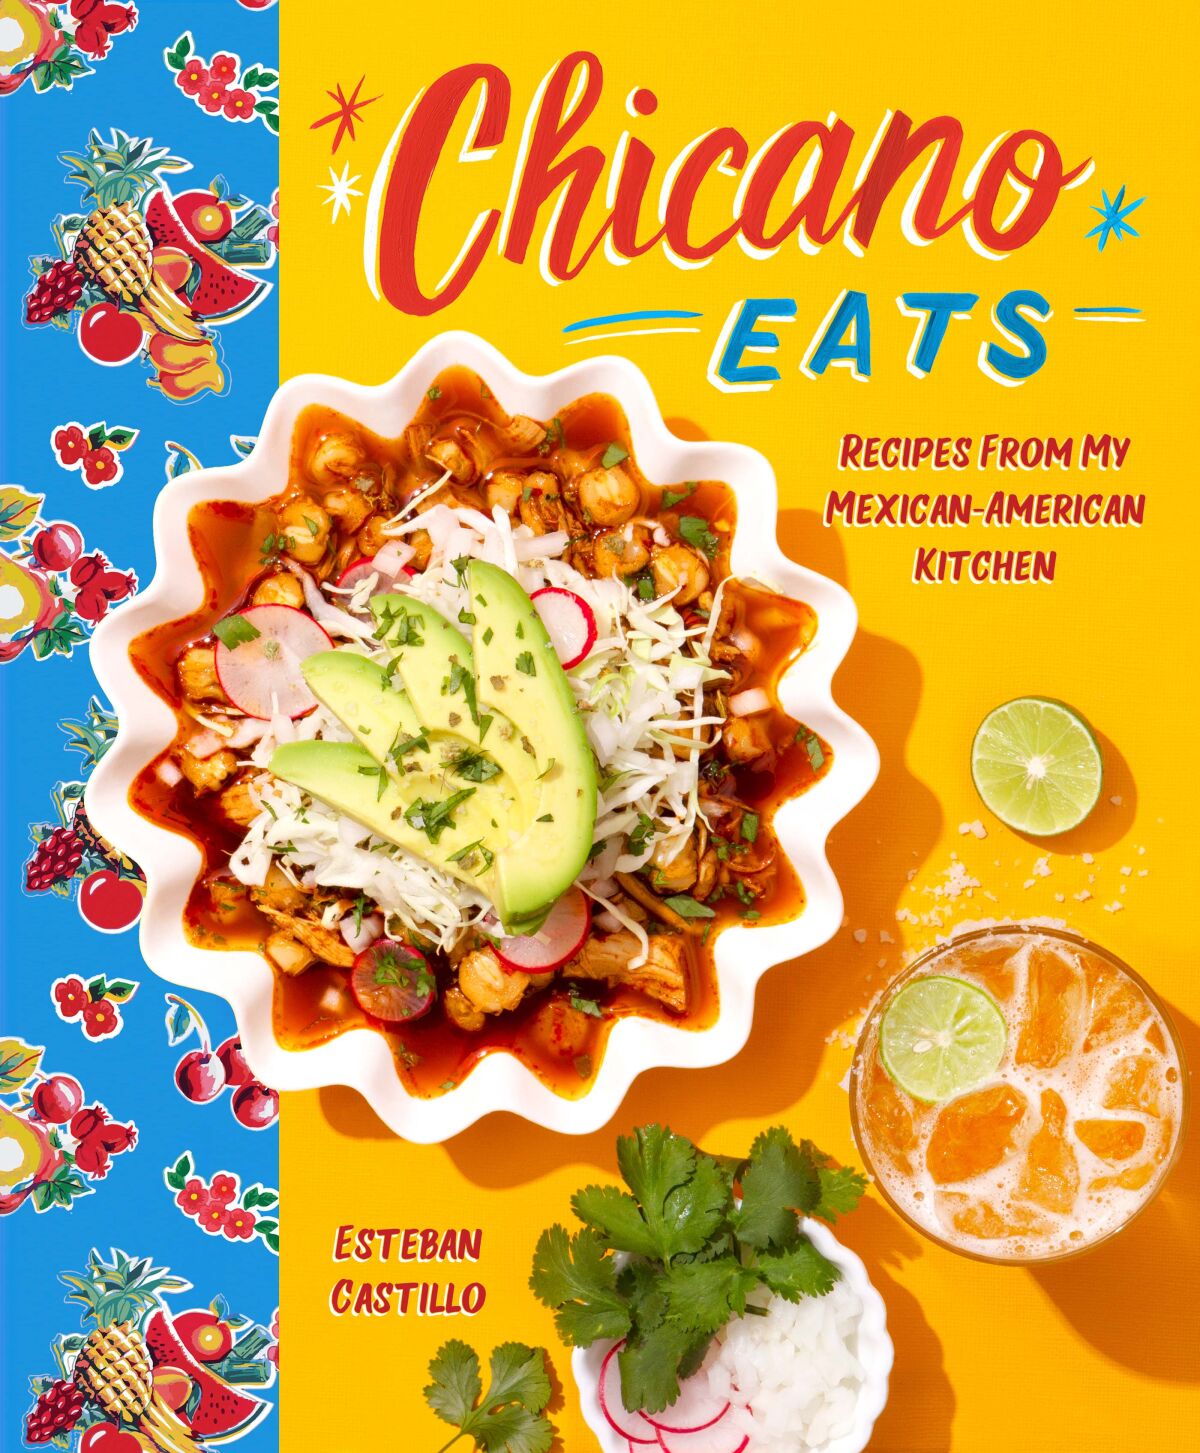 The cover of Esteban Castillo's first cookbook, "Chicano Eats: Recipes from My Mexican-American Kitchen."